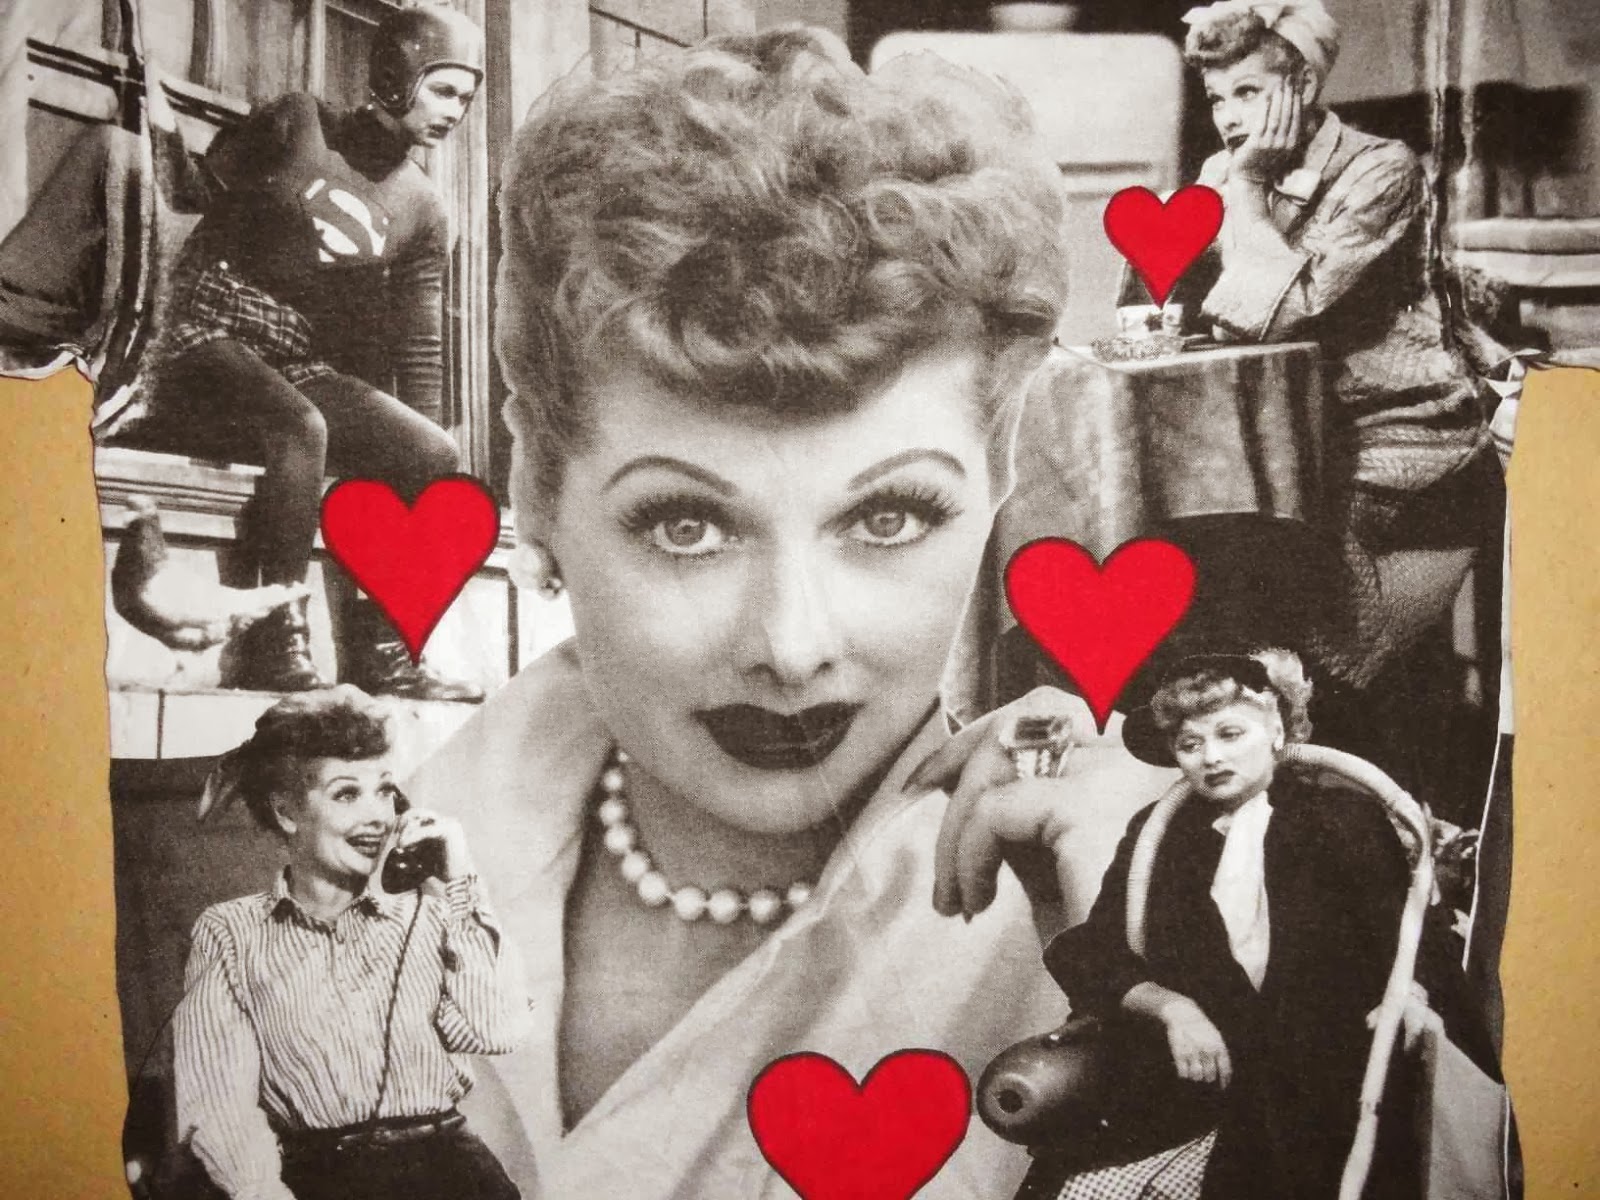 I Love Lucy Wallpaper Gallery